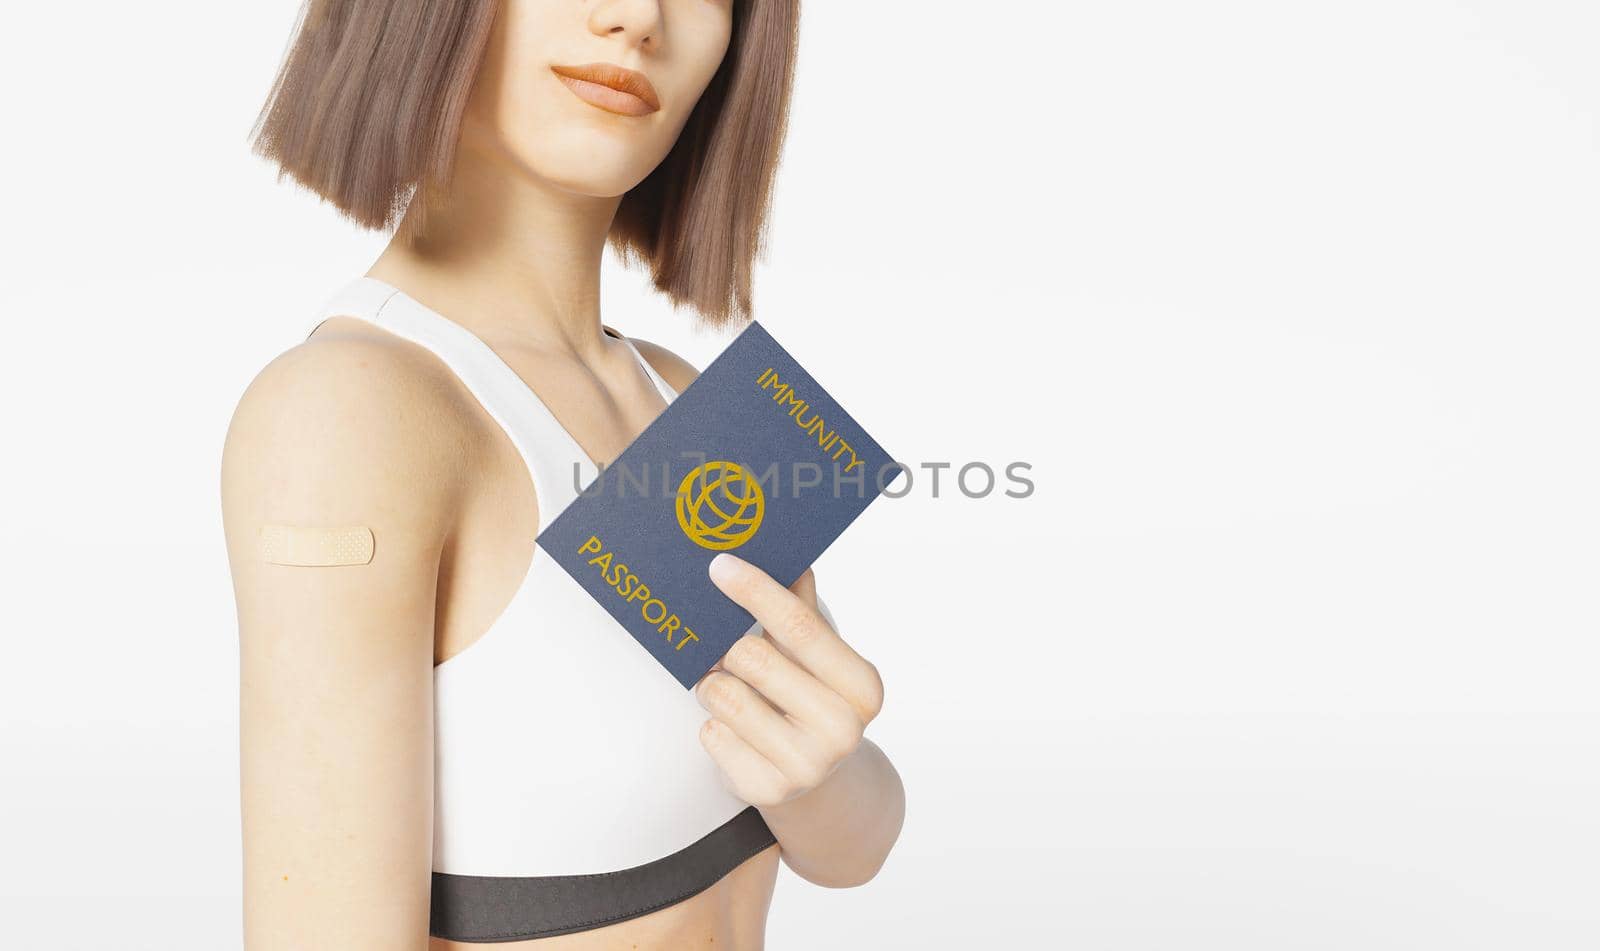 girl holding coronavirus immunity passport with band-aid put on her arm for having been vaccinated. white background. 3d rendering